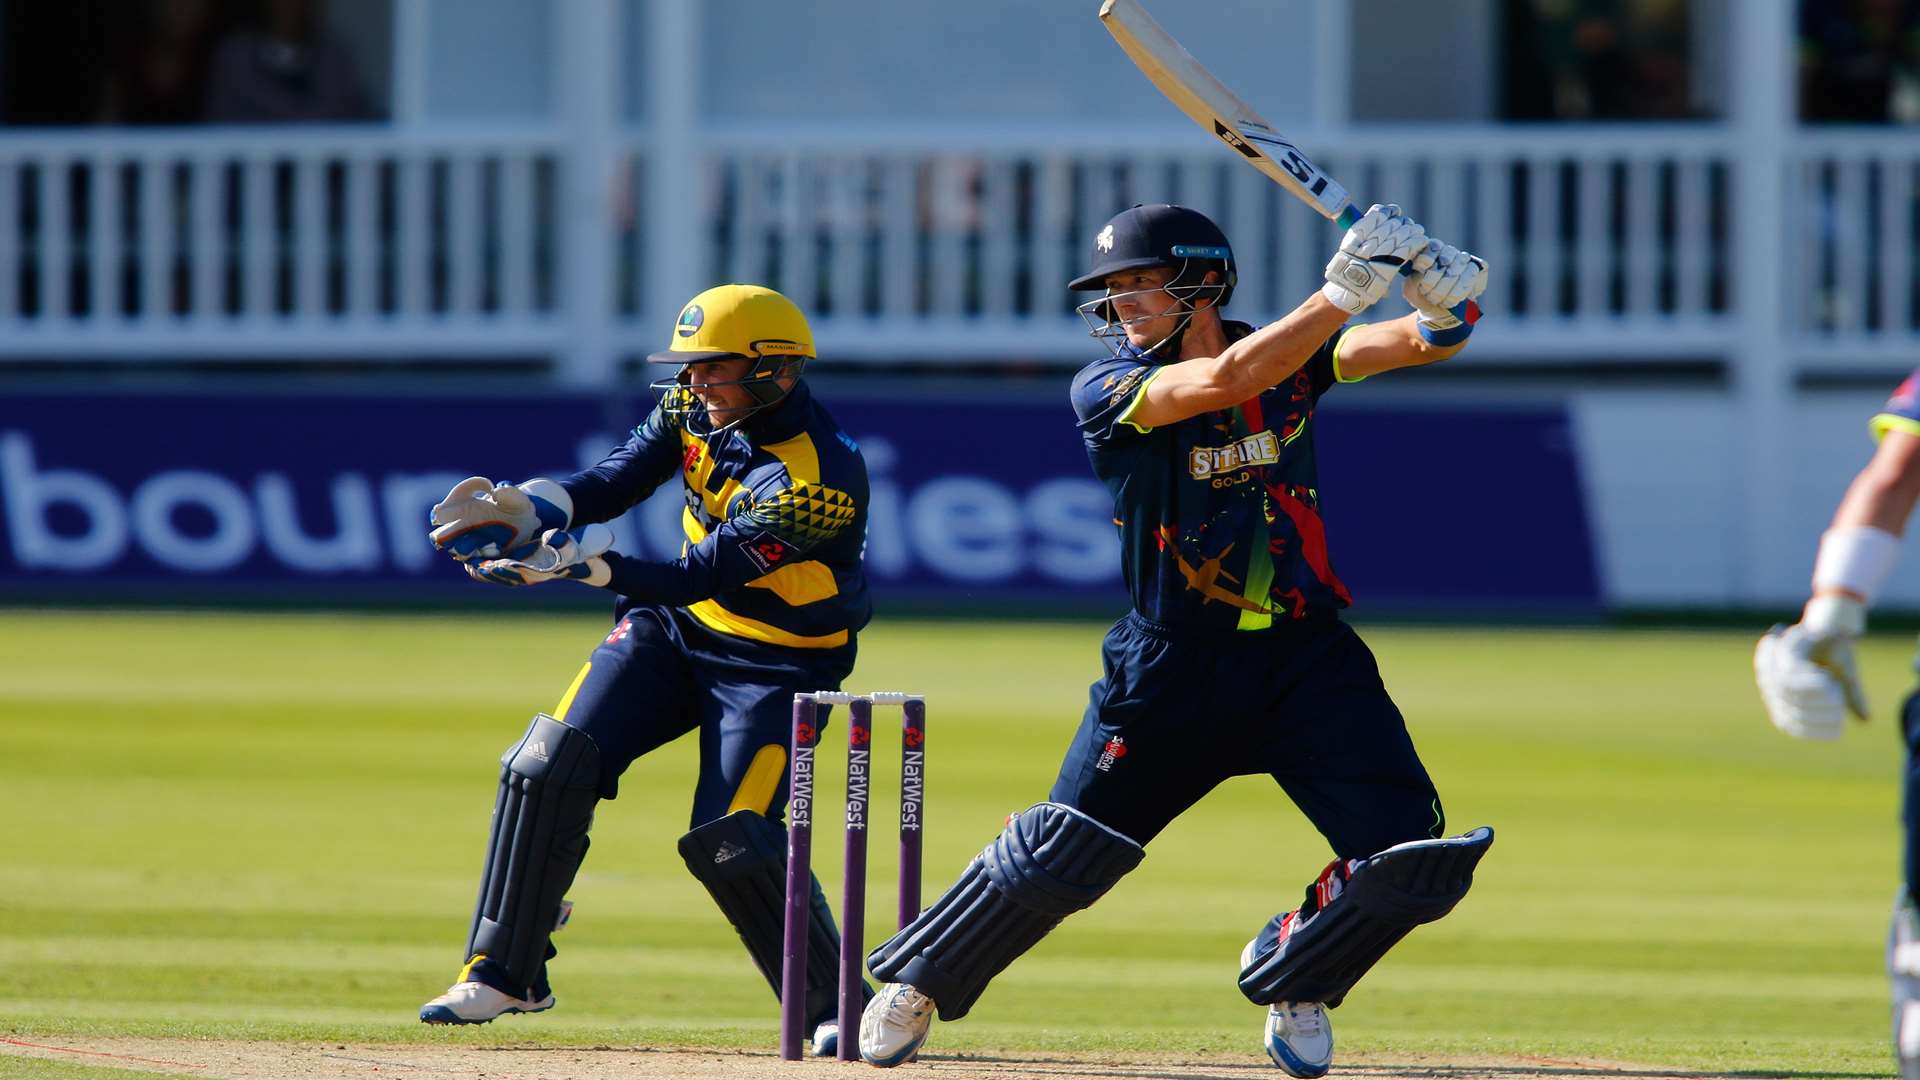 Joe Denly made 68 against Glamorgan, but Kent suffered a 25-run defeat. Picture: Andy Jones.